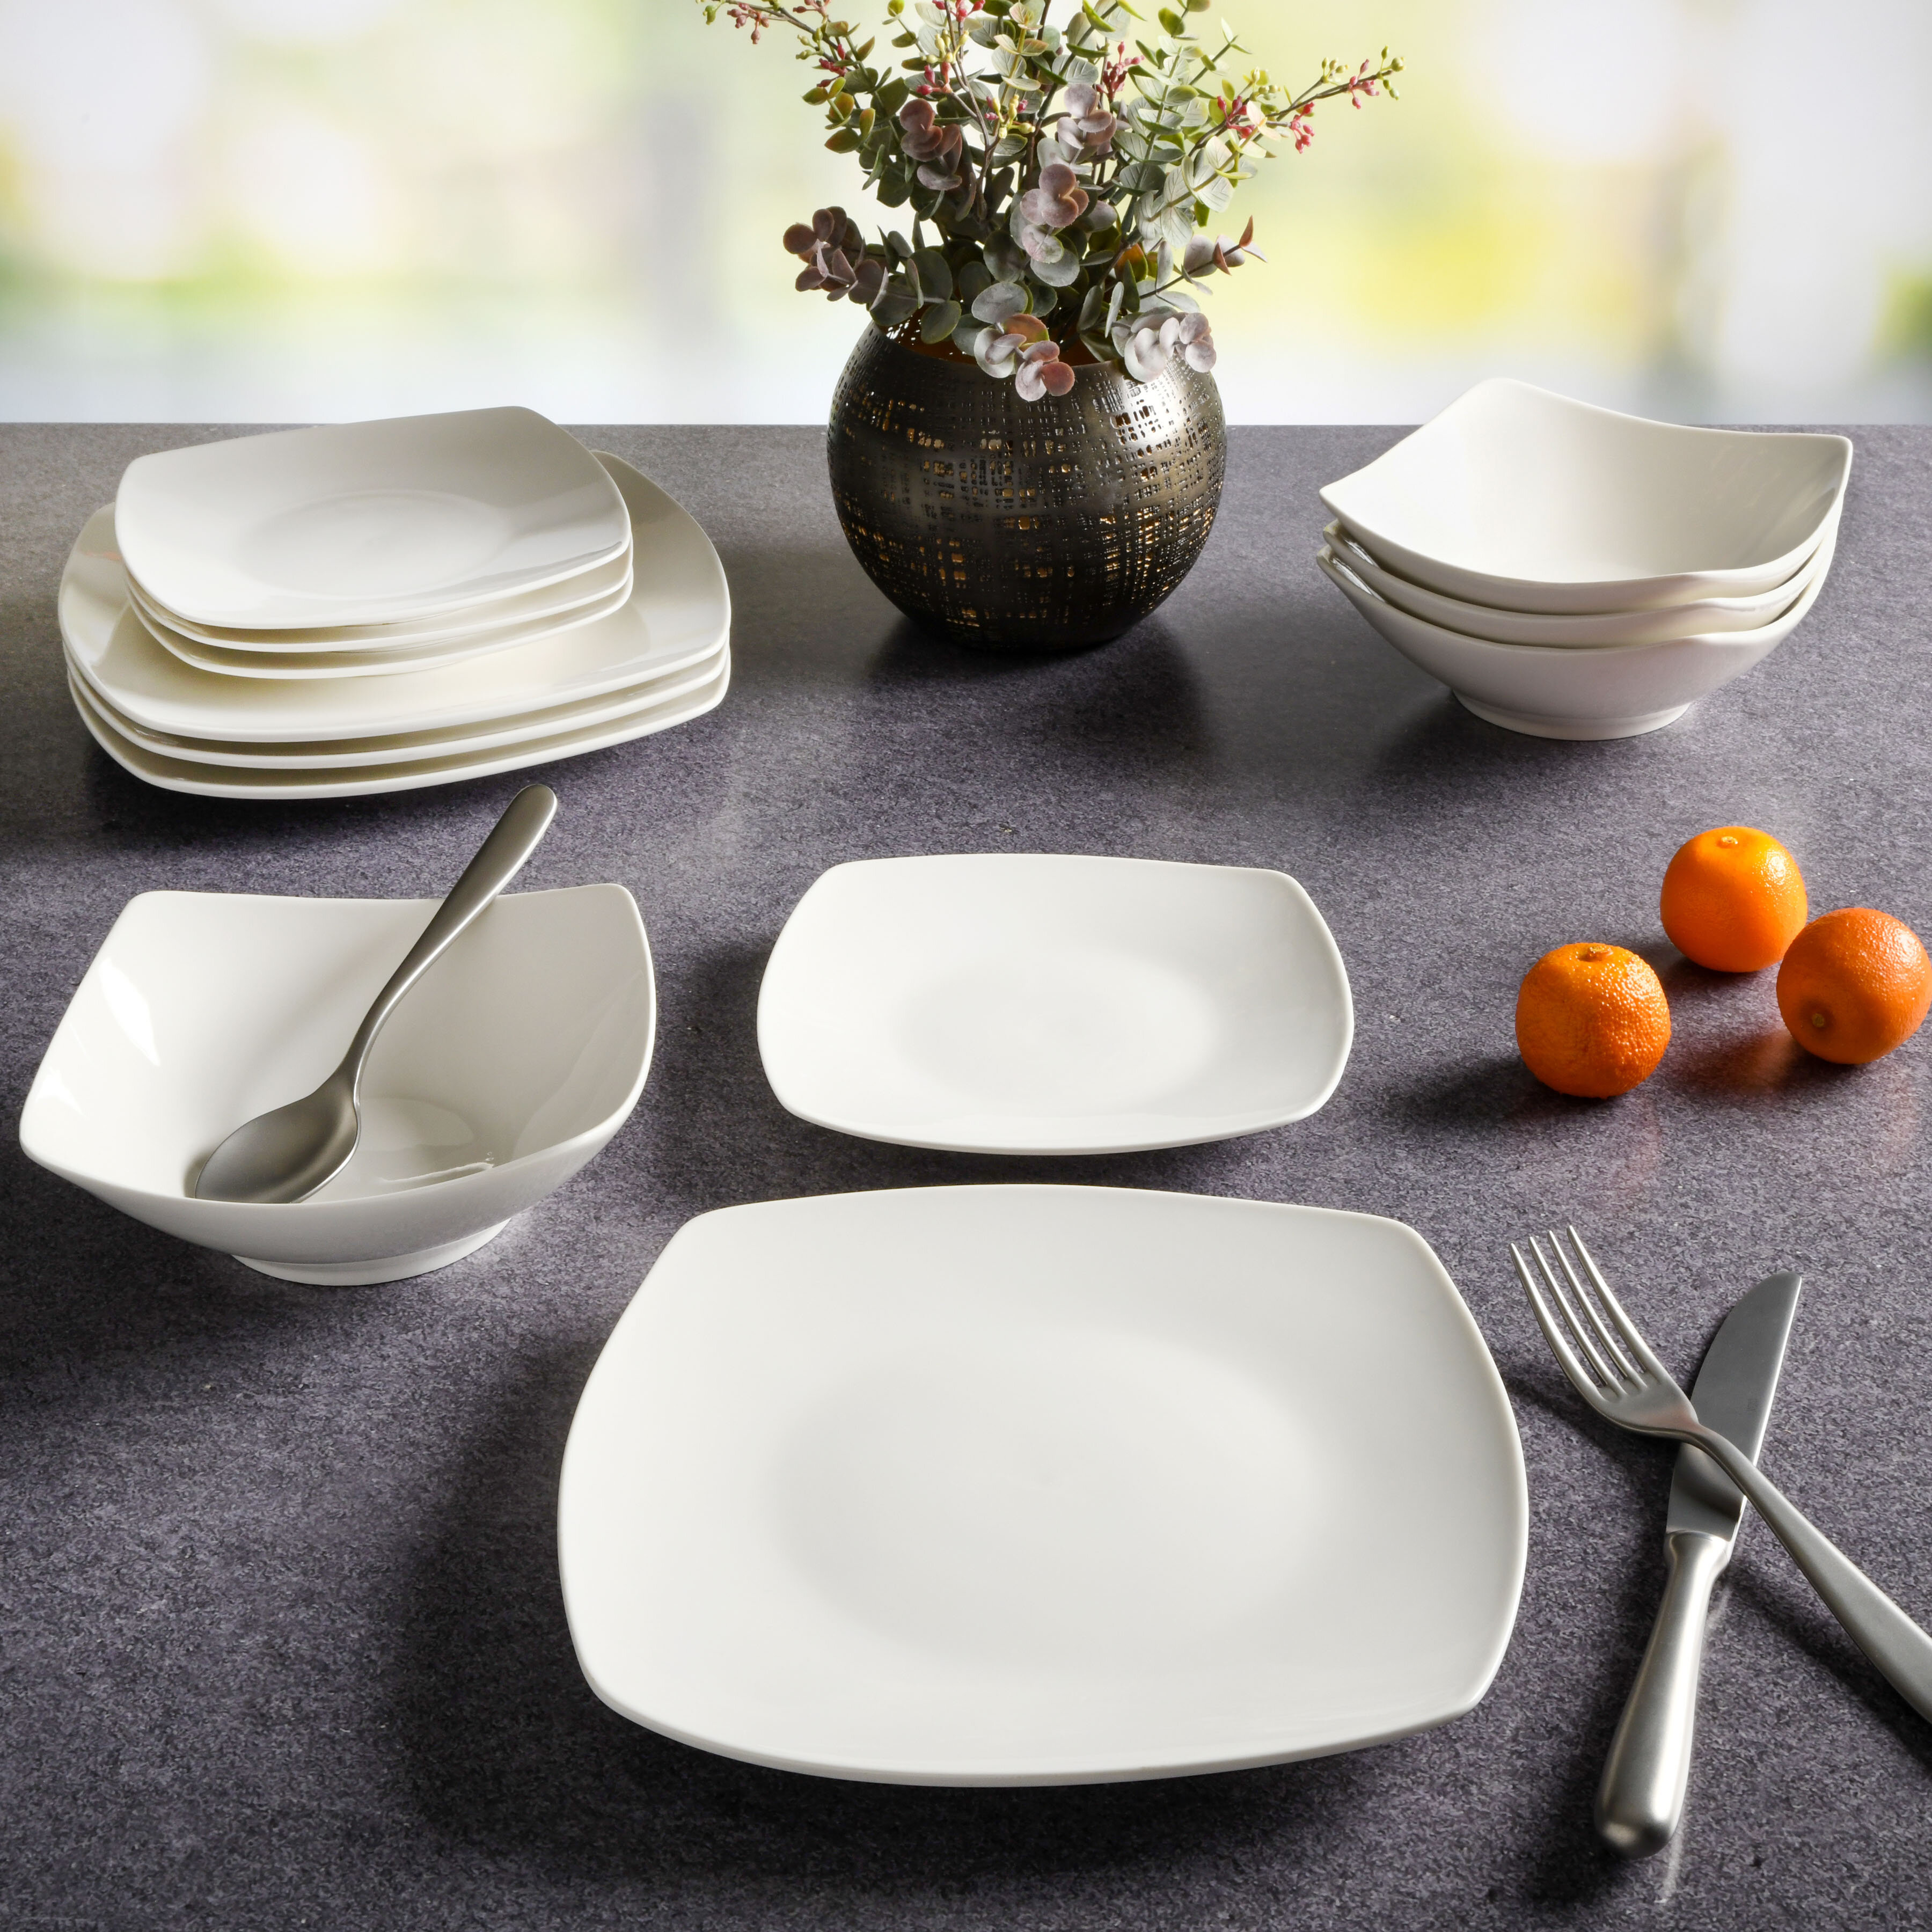 Gibson Porcelain China Dinnerware Set - Service for 4 & Reviews